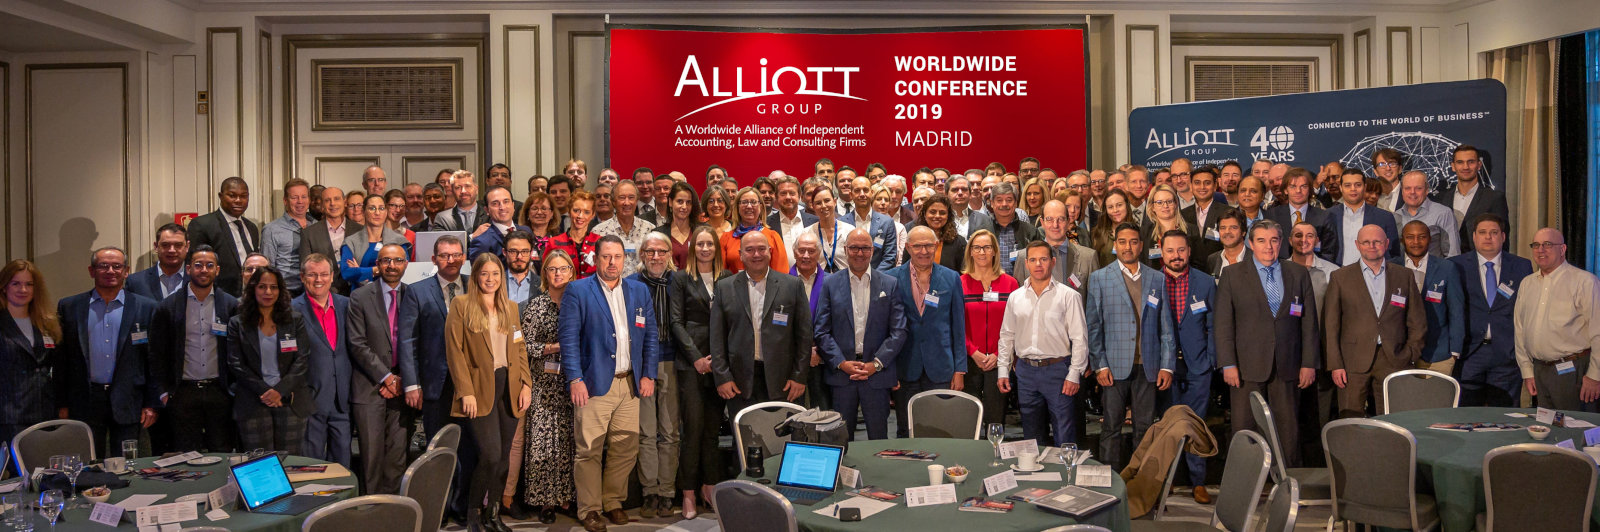 2019 Worldwide Conference of Alliott Group